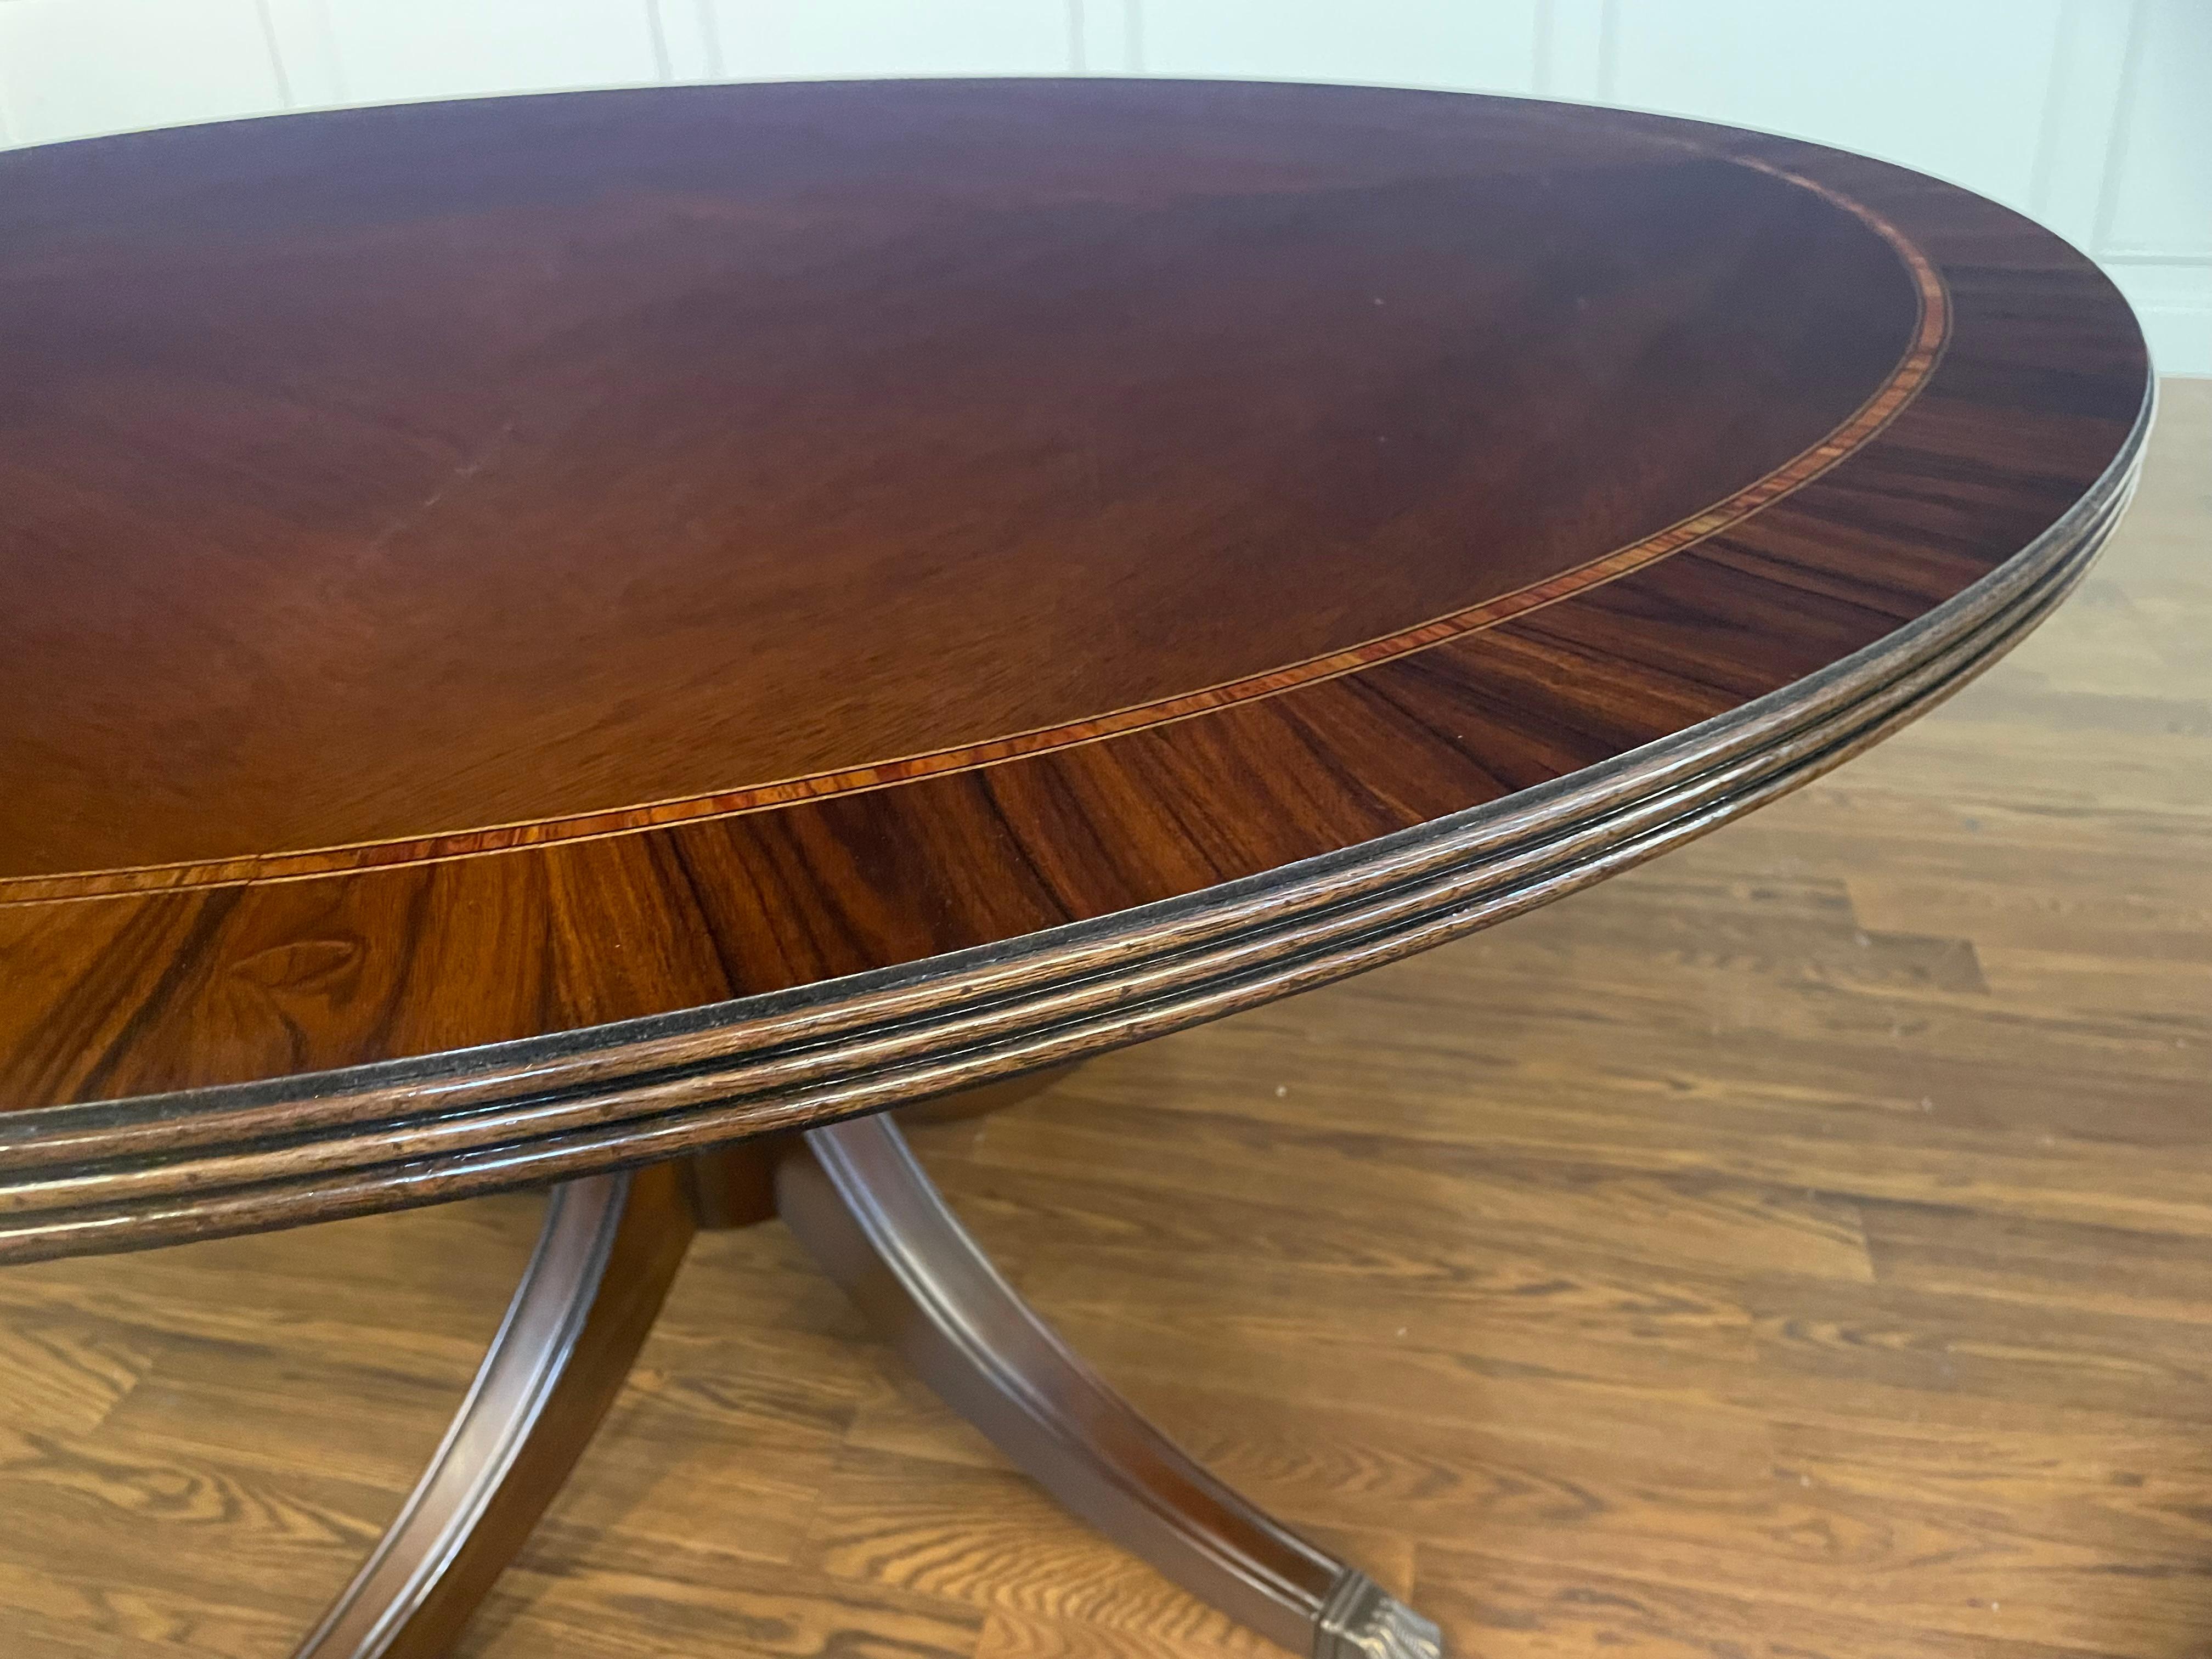 Georgian 54 Inch Round Mahogany Dining Table by Leighton Hall - Showroom Sample For Sale